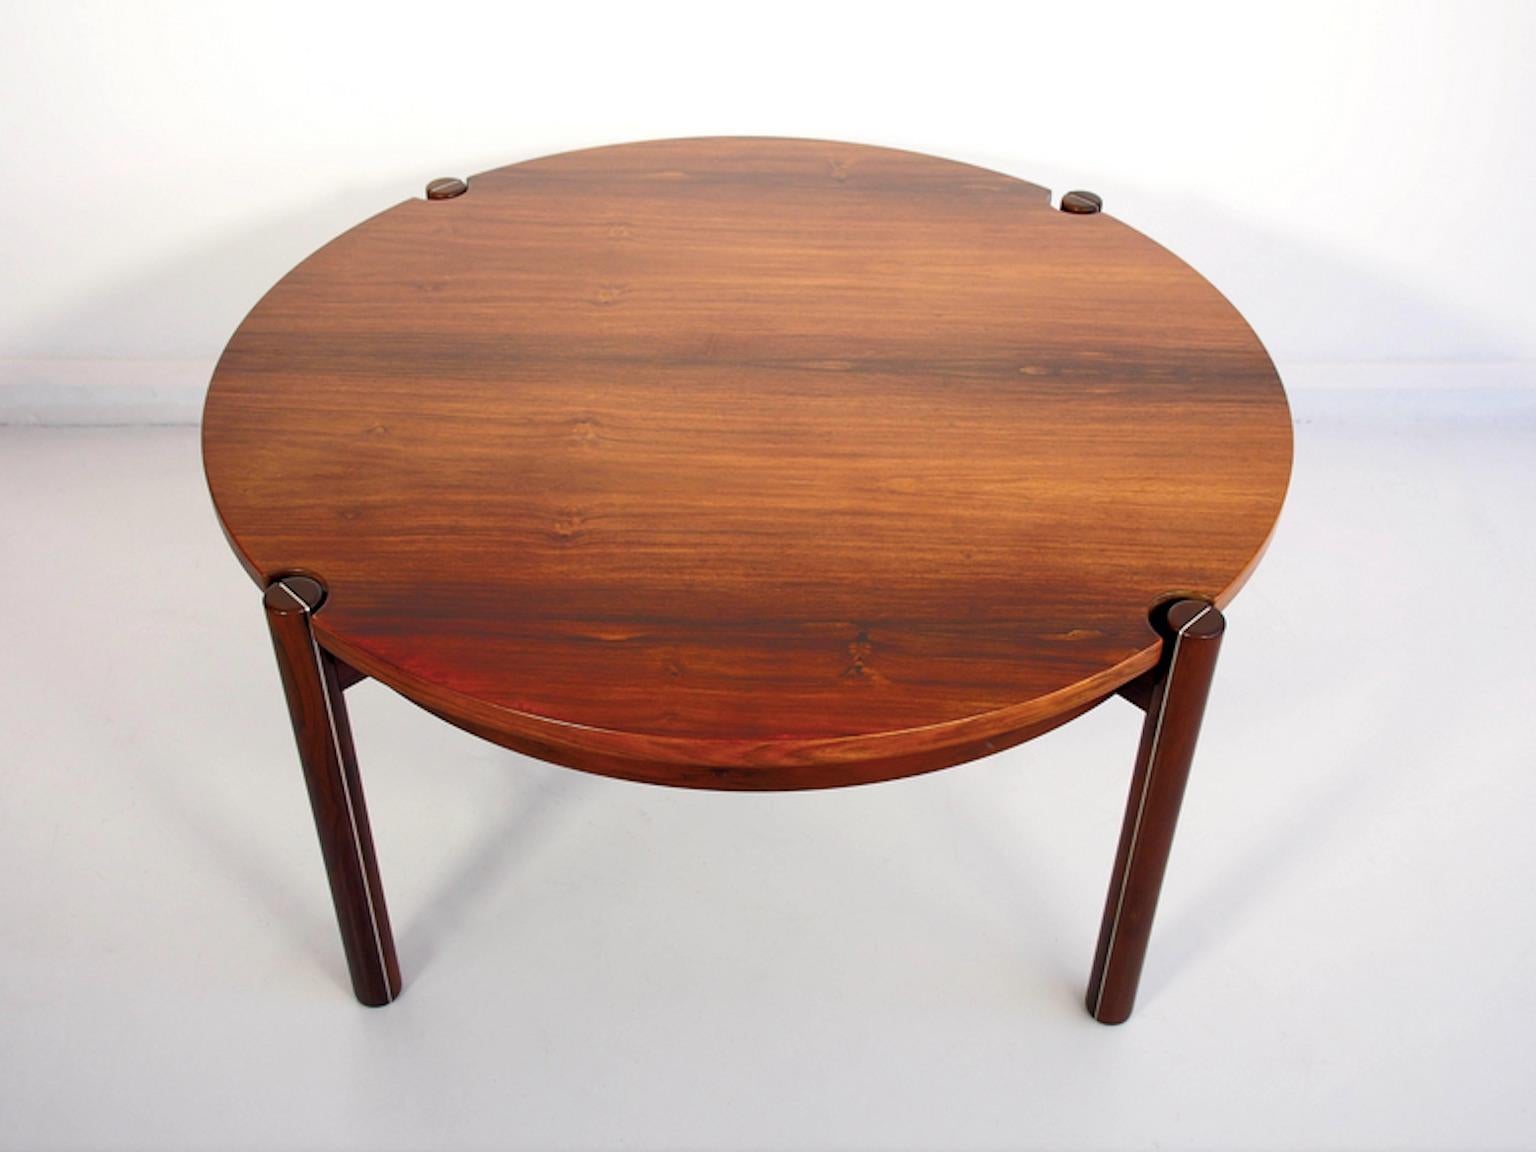 Hans J. Frydendal round hardwood coffee table. Four legs with aluminum details made of solid wood. Minor pressure mark on the table top.